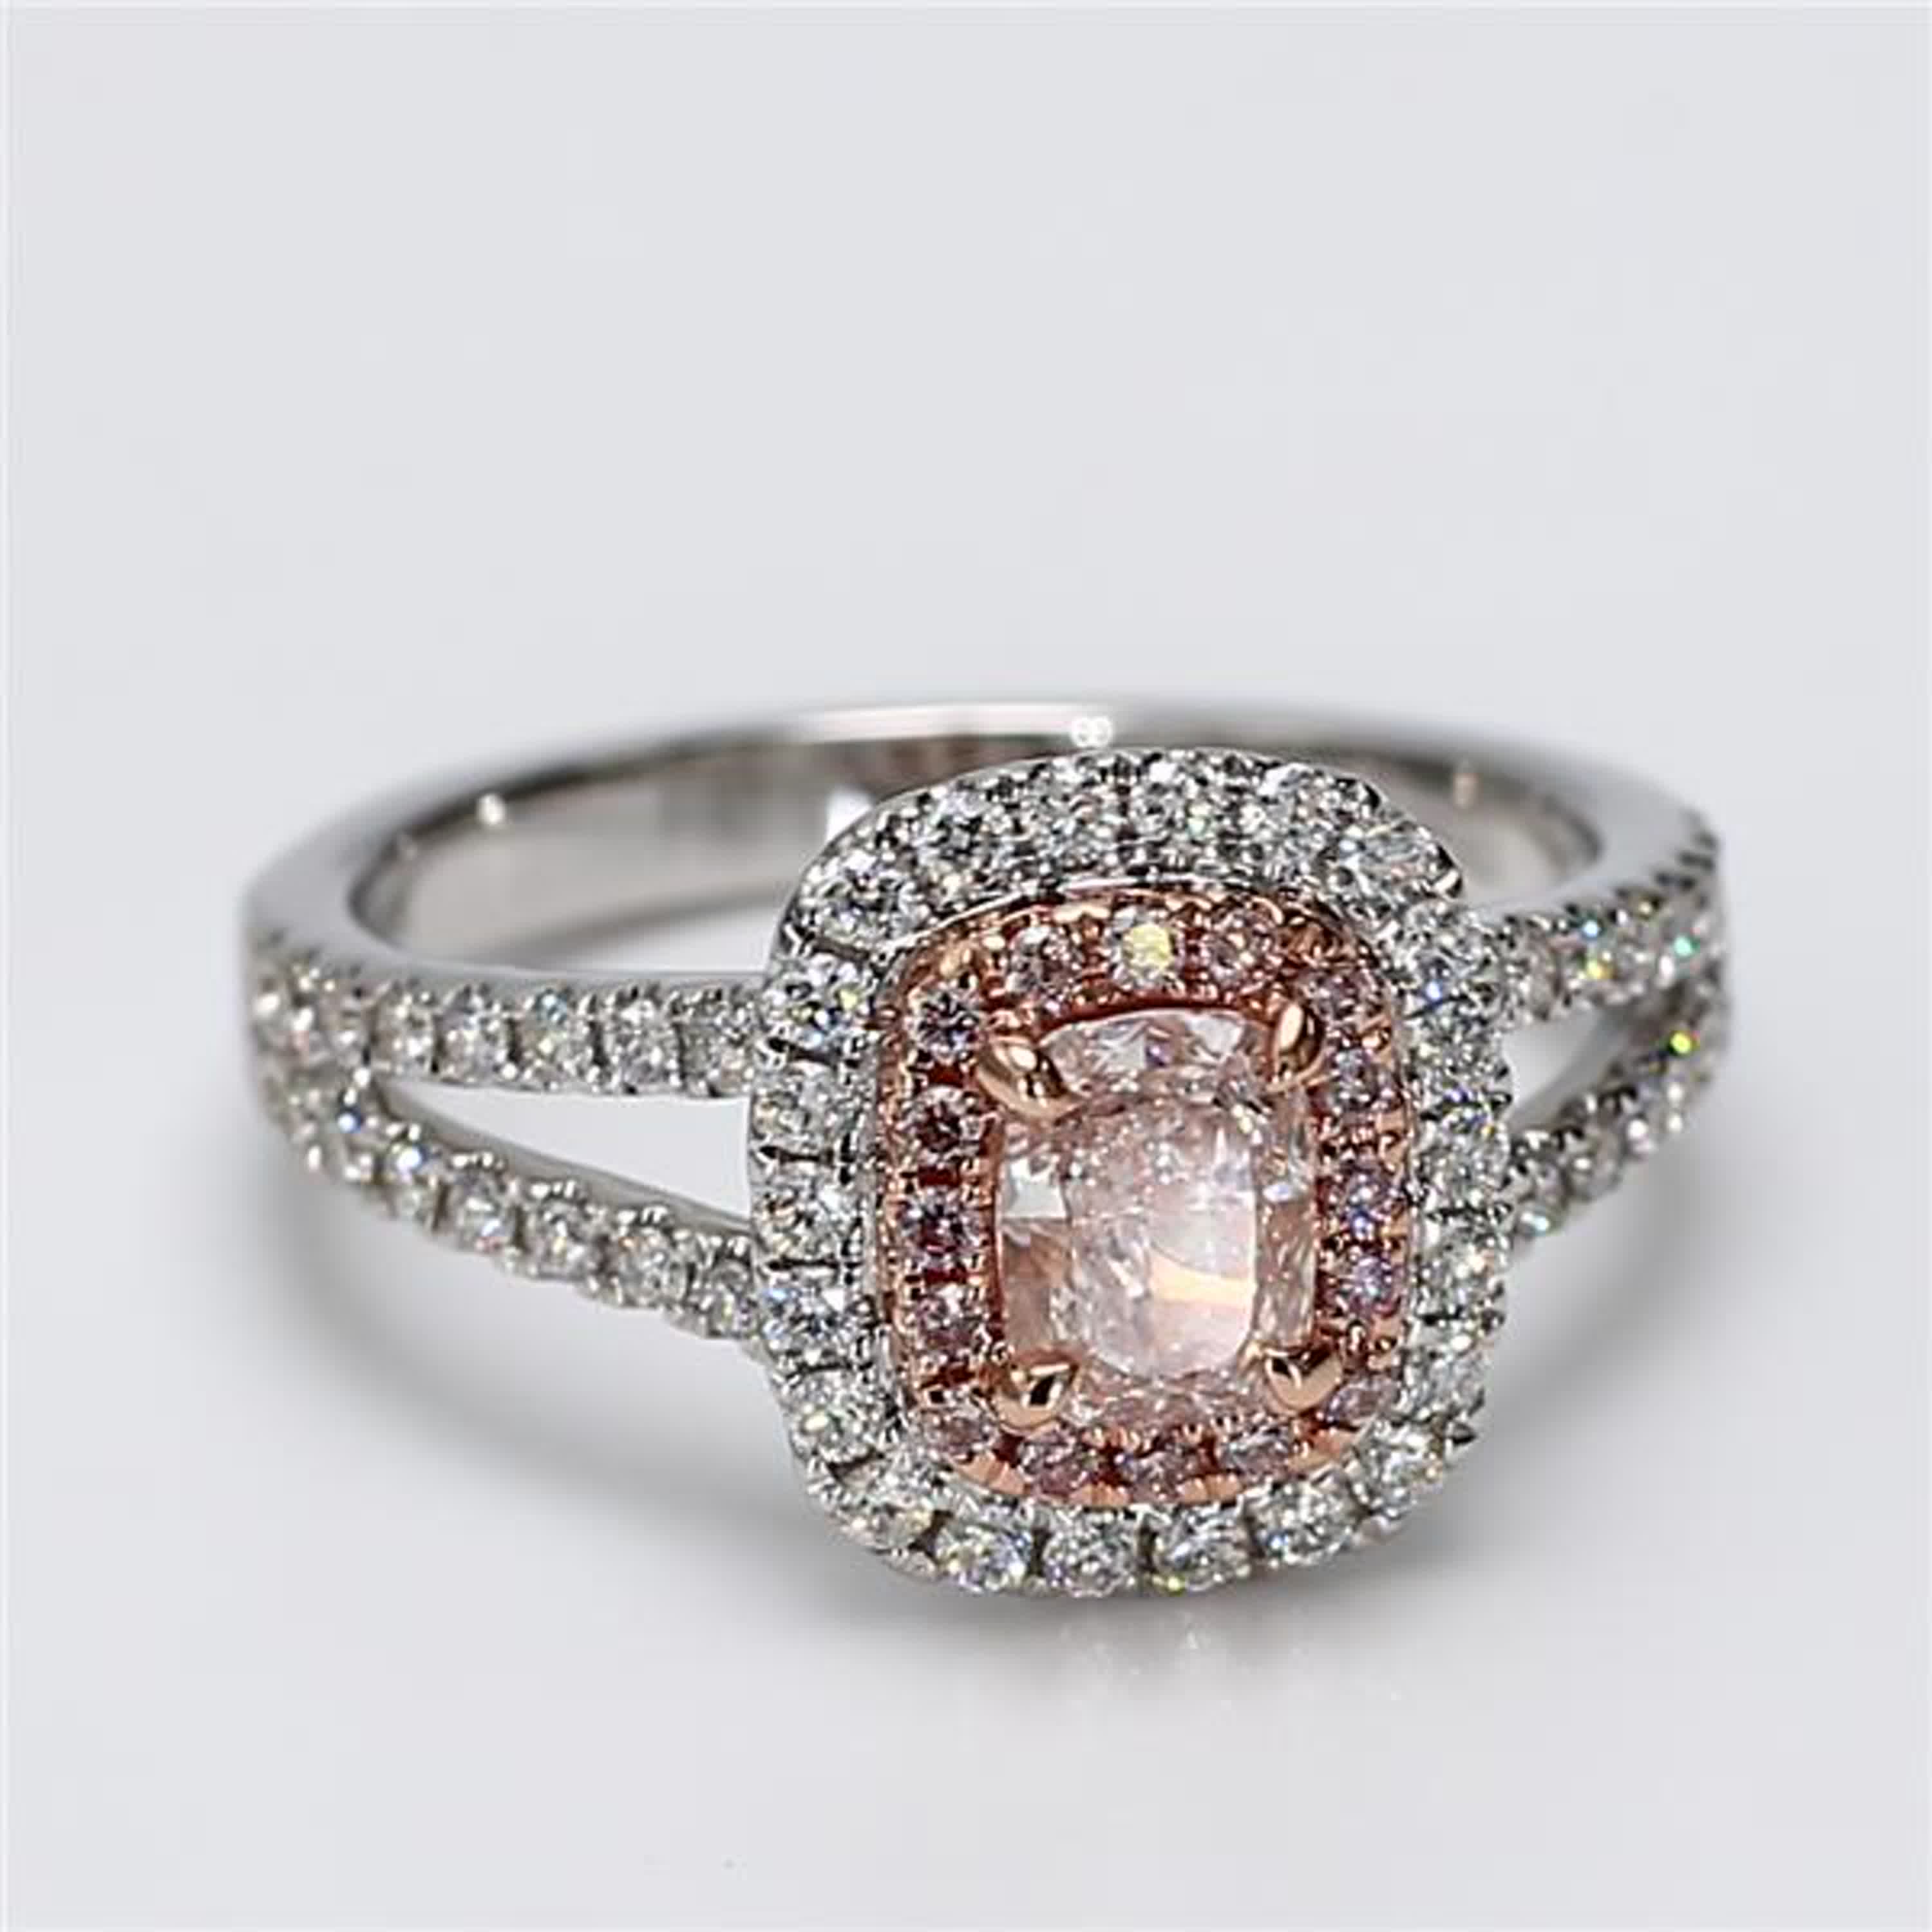 GIA Certified Natural Pink Cushion and White Diamond 1.17 Carat TW Gold Ring